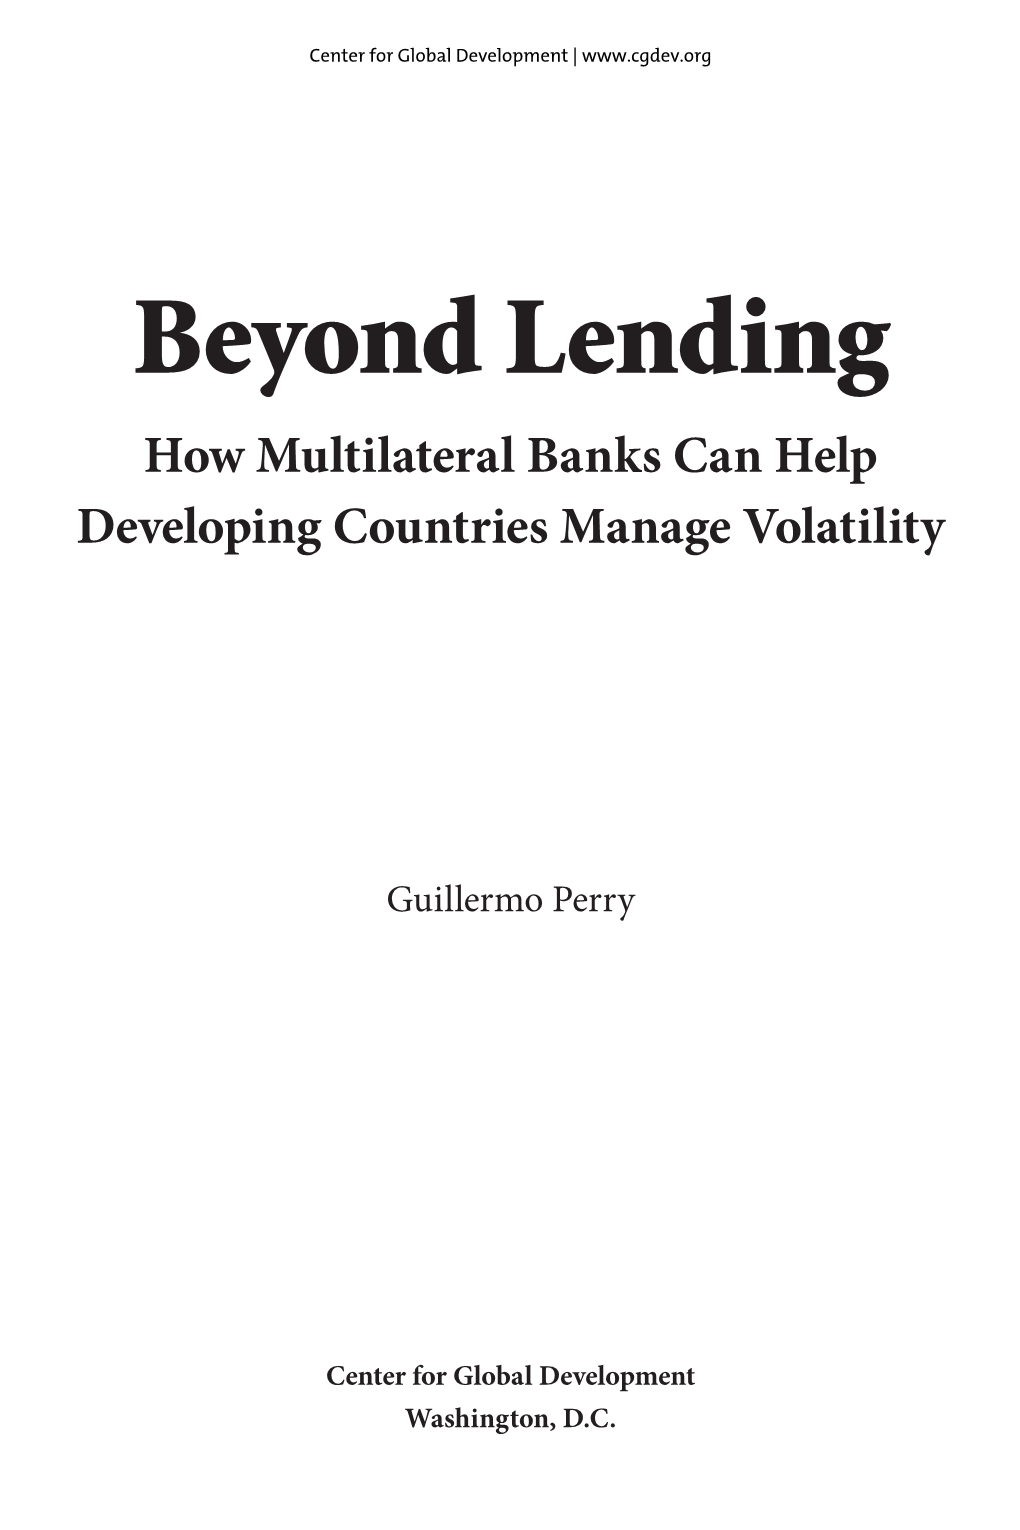 Beyond Lending How Multilateral Banks Can Help Developing Countries Manage Volatility